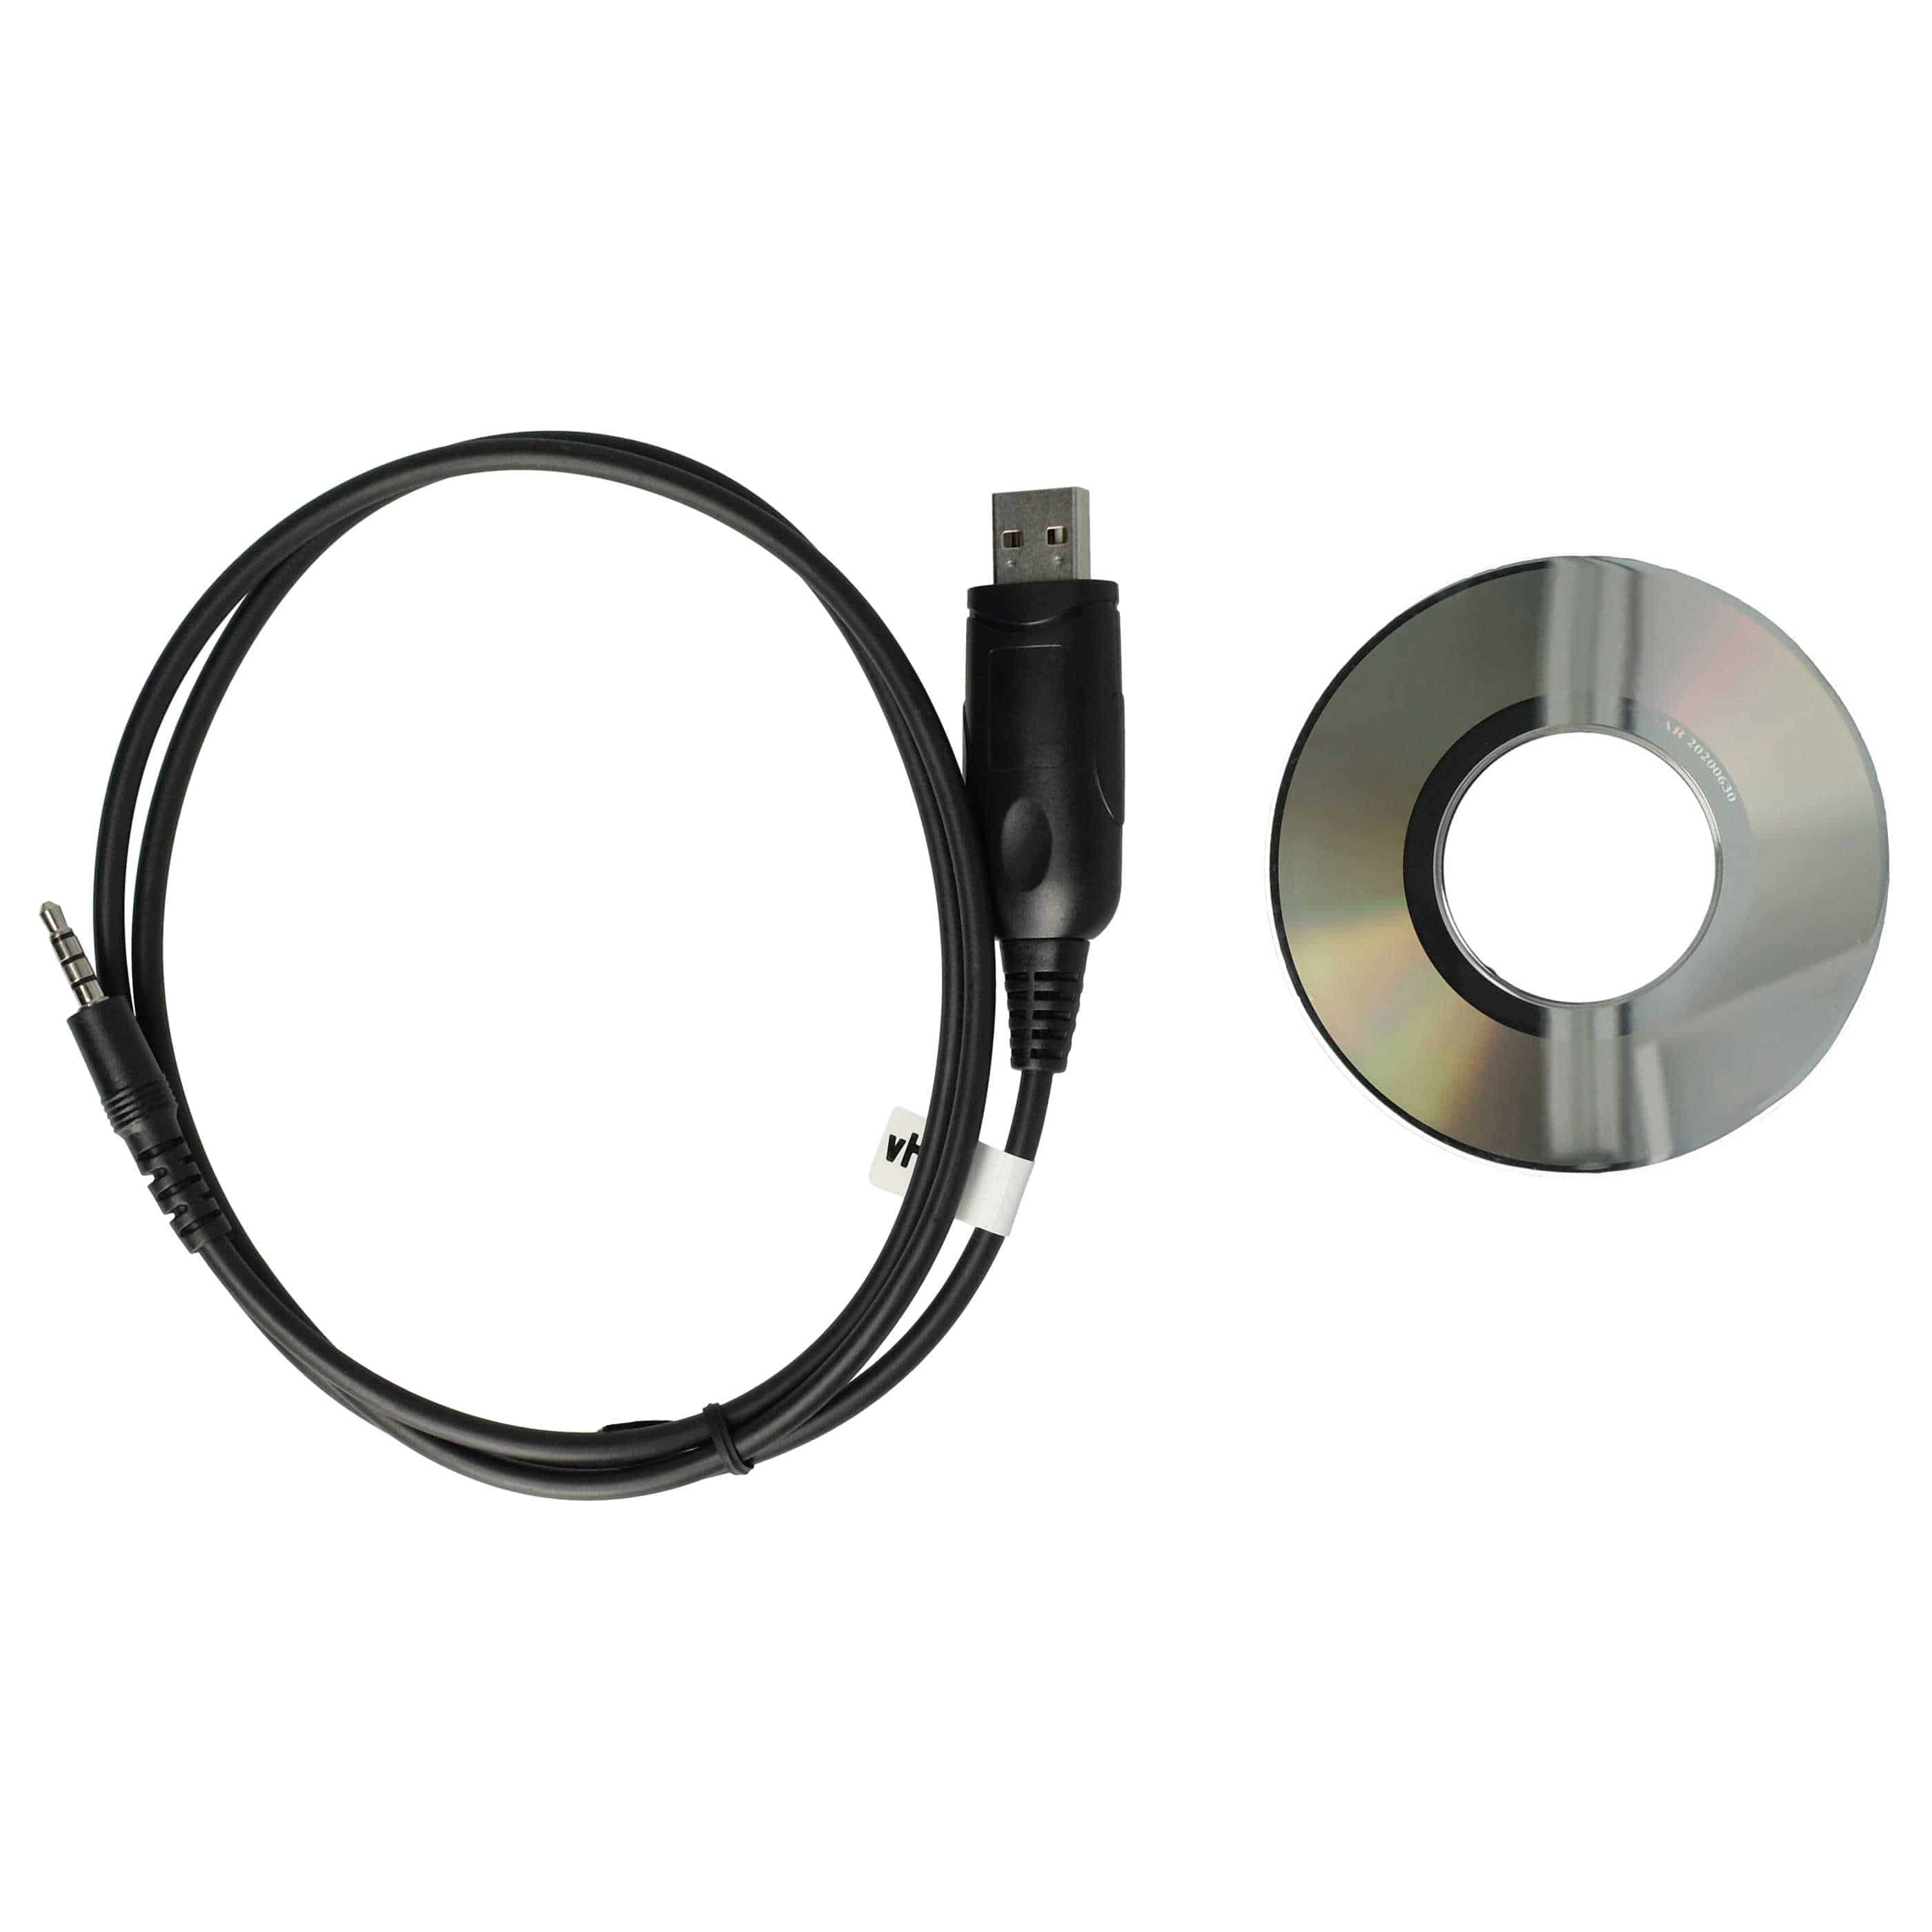 Programming Cable suitable for Baofeng UV-3R+ Plus, UV-3RRadio